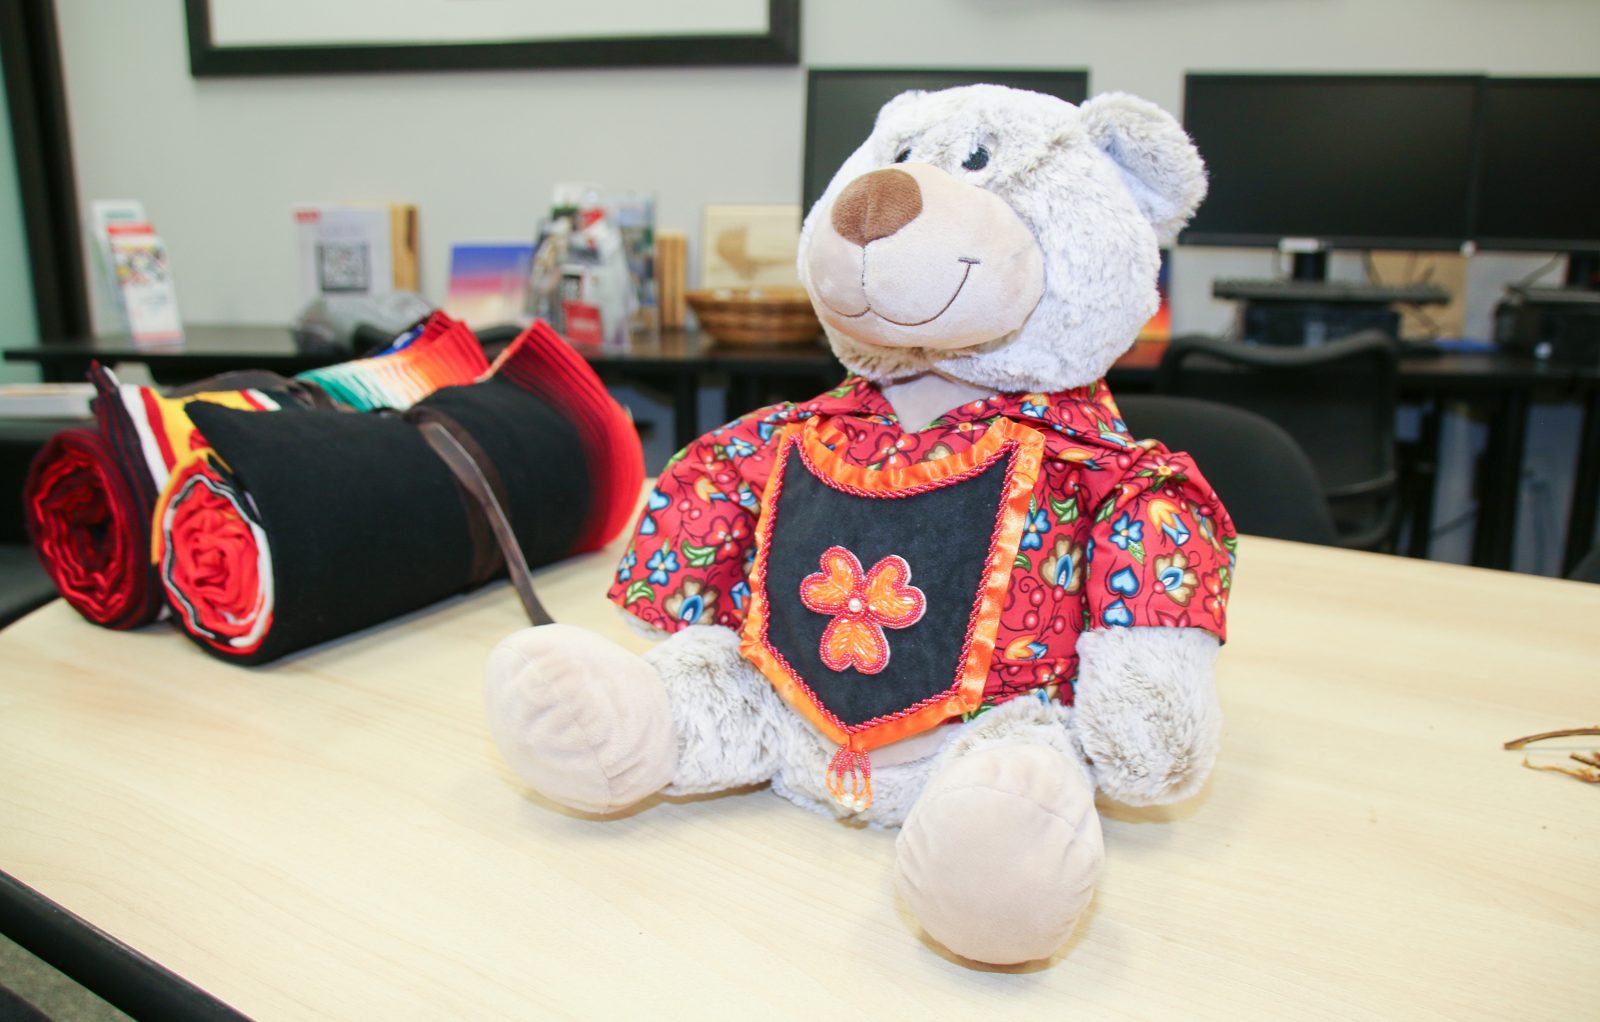 A stuffed bear clothed in a red and blue printed shirt and an orange and black sash sits on a table.